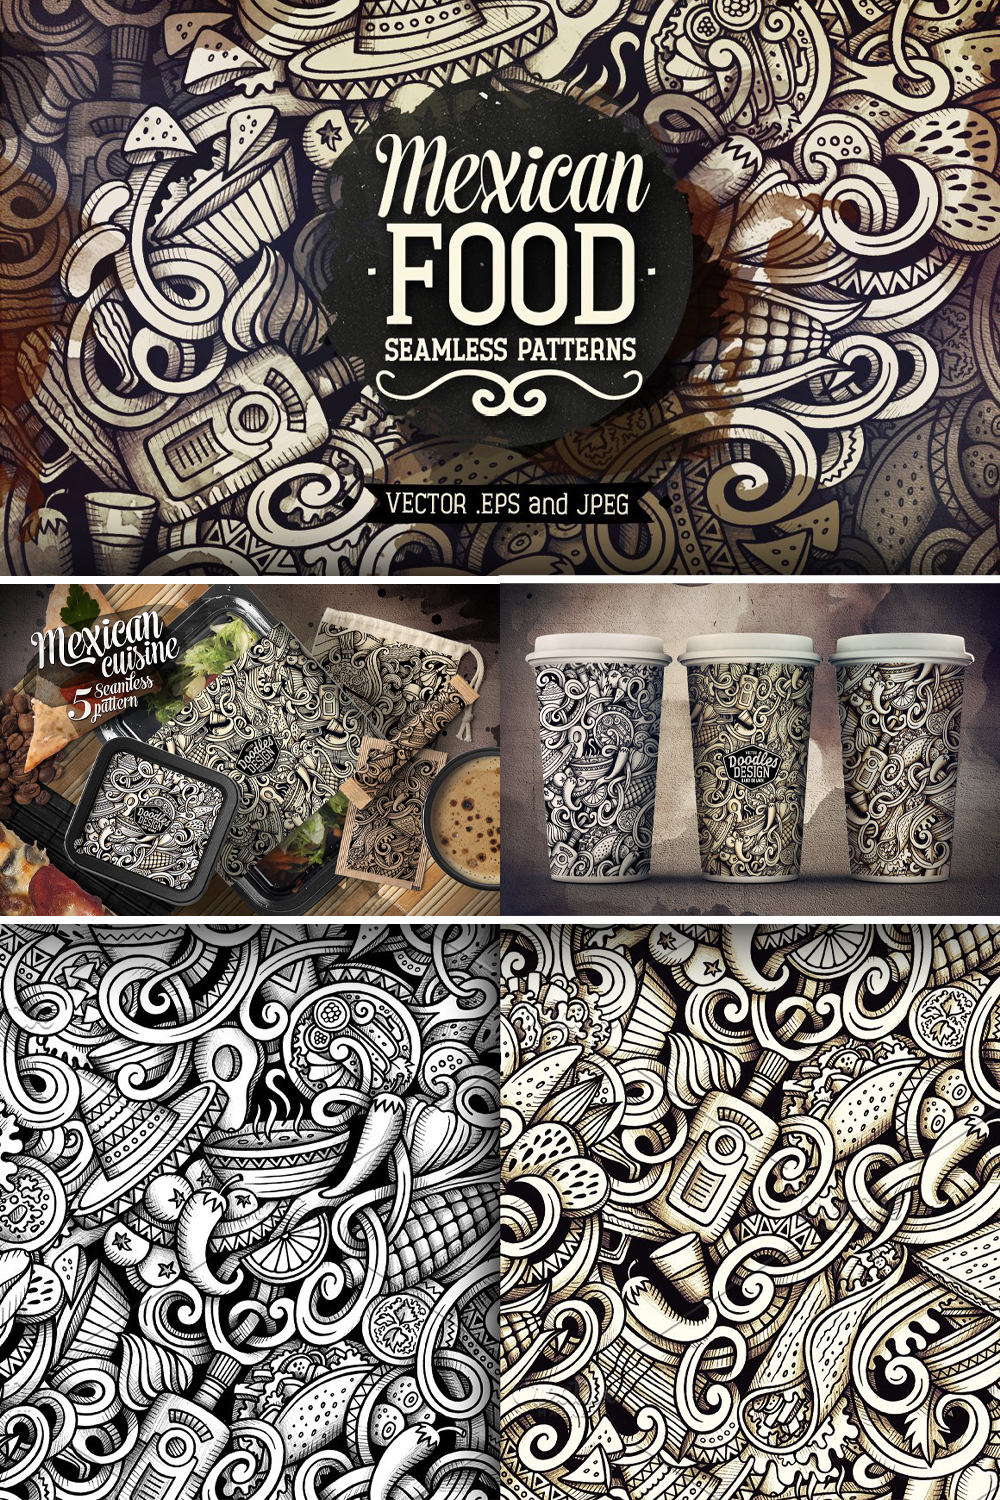 Mexican food graphics patterns of pinterest.